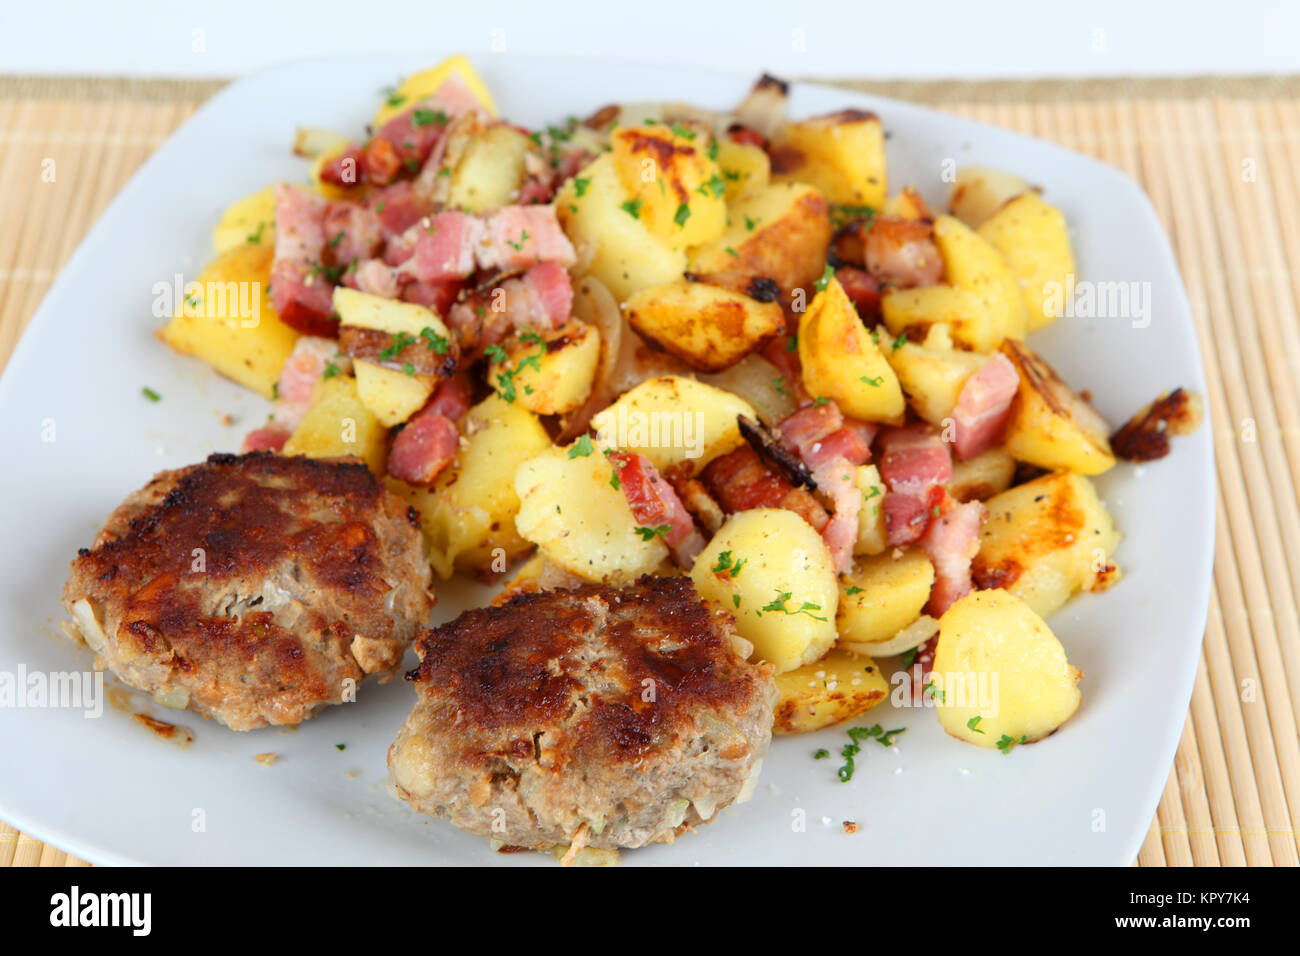 meatballs with fried potatoes Stock Photo